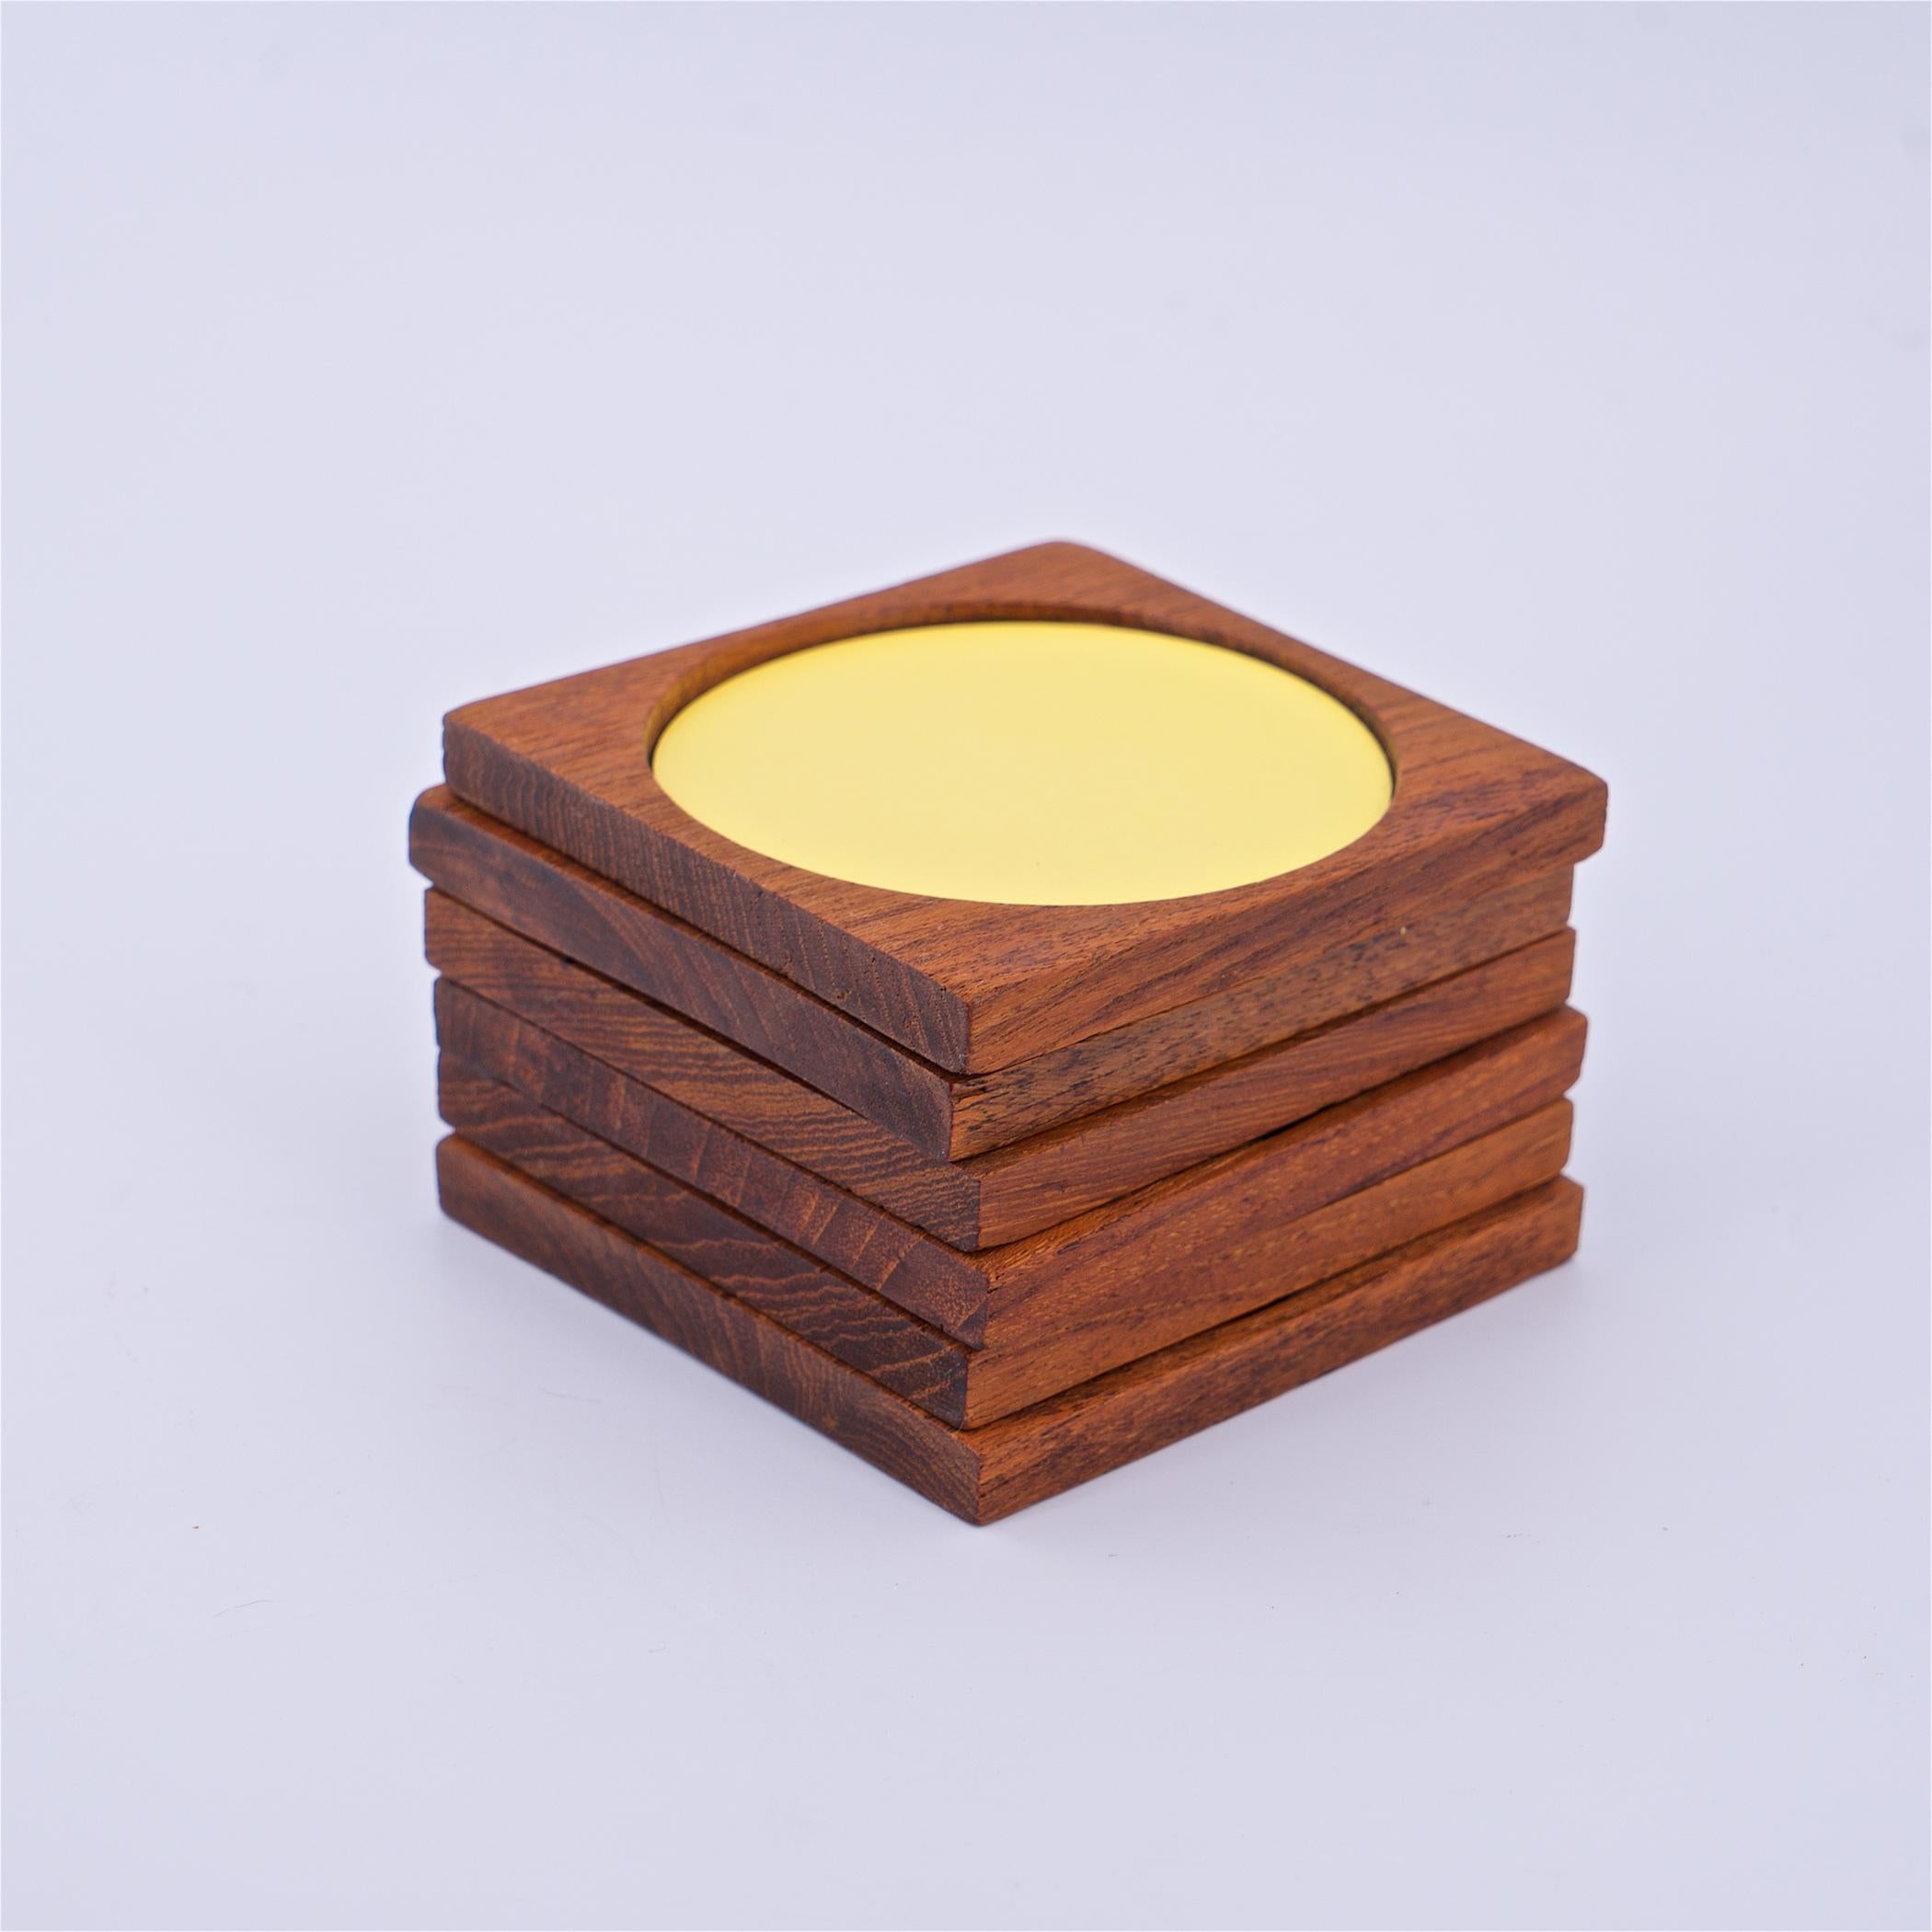 Oiled Colorful Graphic Design Teak Cocktail Coasters Midcentury Palm Springs Vibe